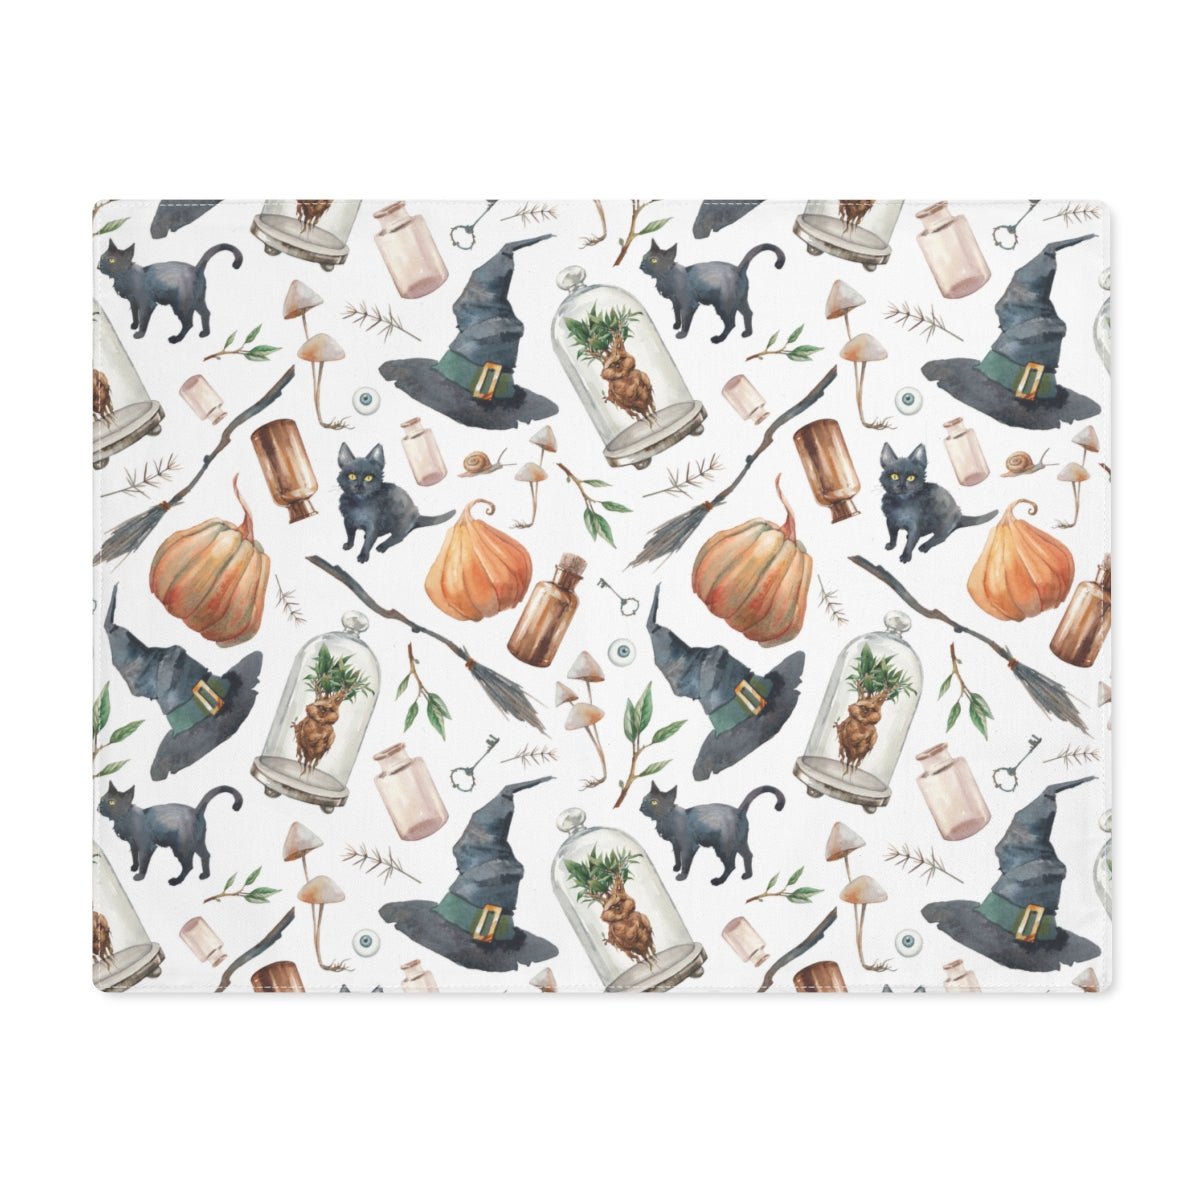 Halloween Witch Hats Placemat - Puffin Lime